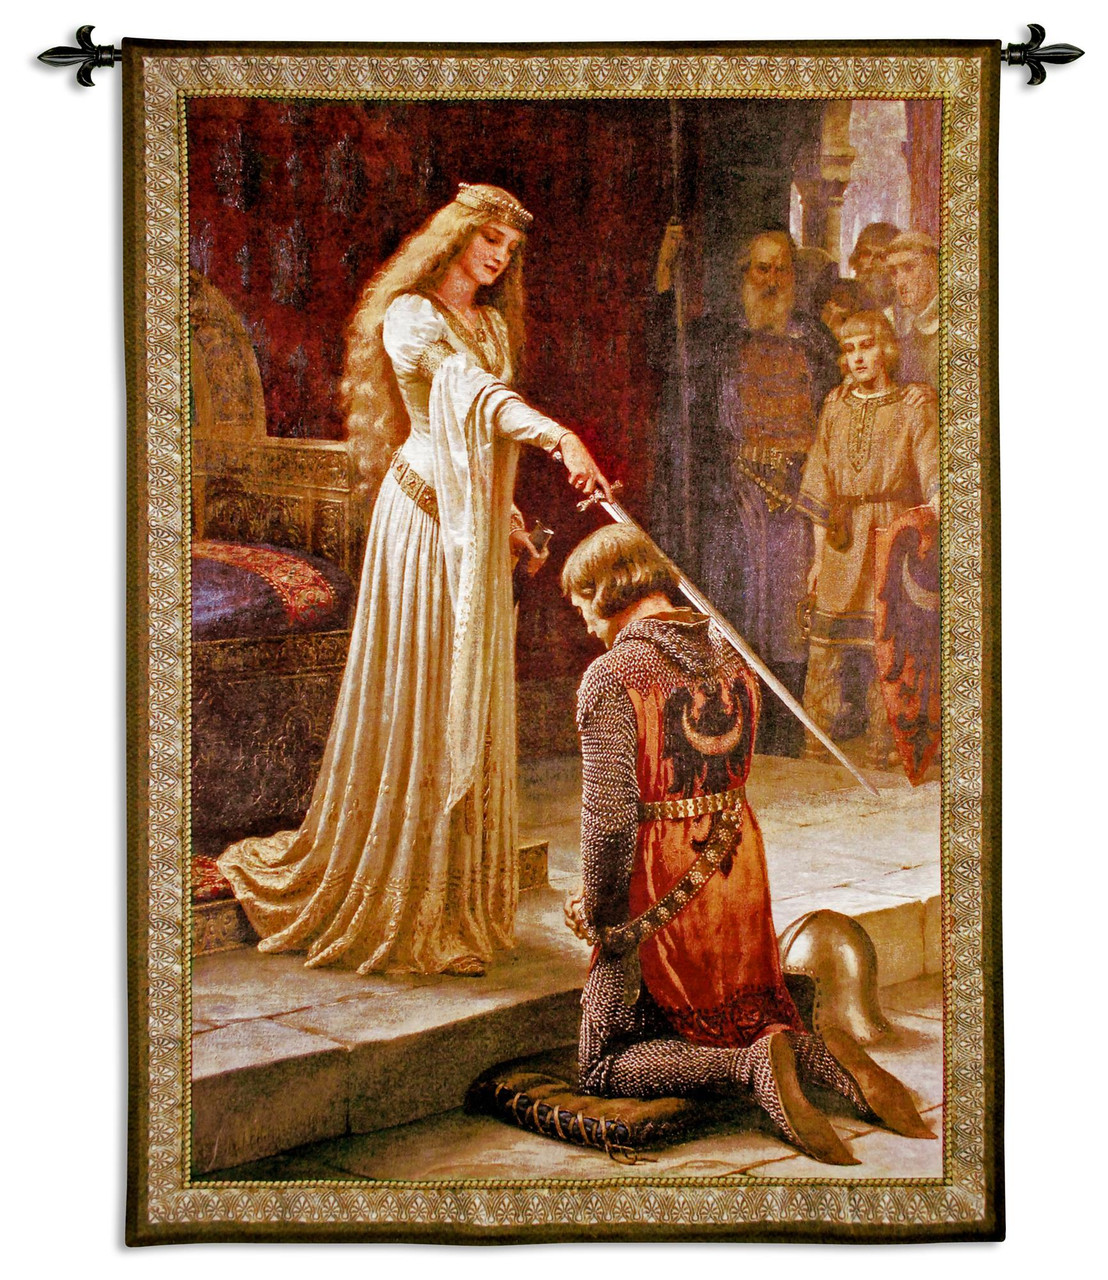 The Accolade by Edmund Blair Leighton Woven Tapestry Wall Art Hanging Medieval  Knight Ceremony 100% Cotton USA Size 71x52